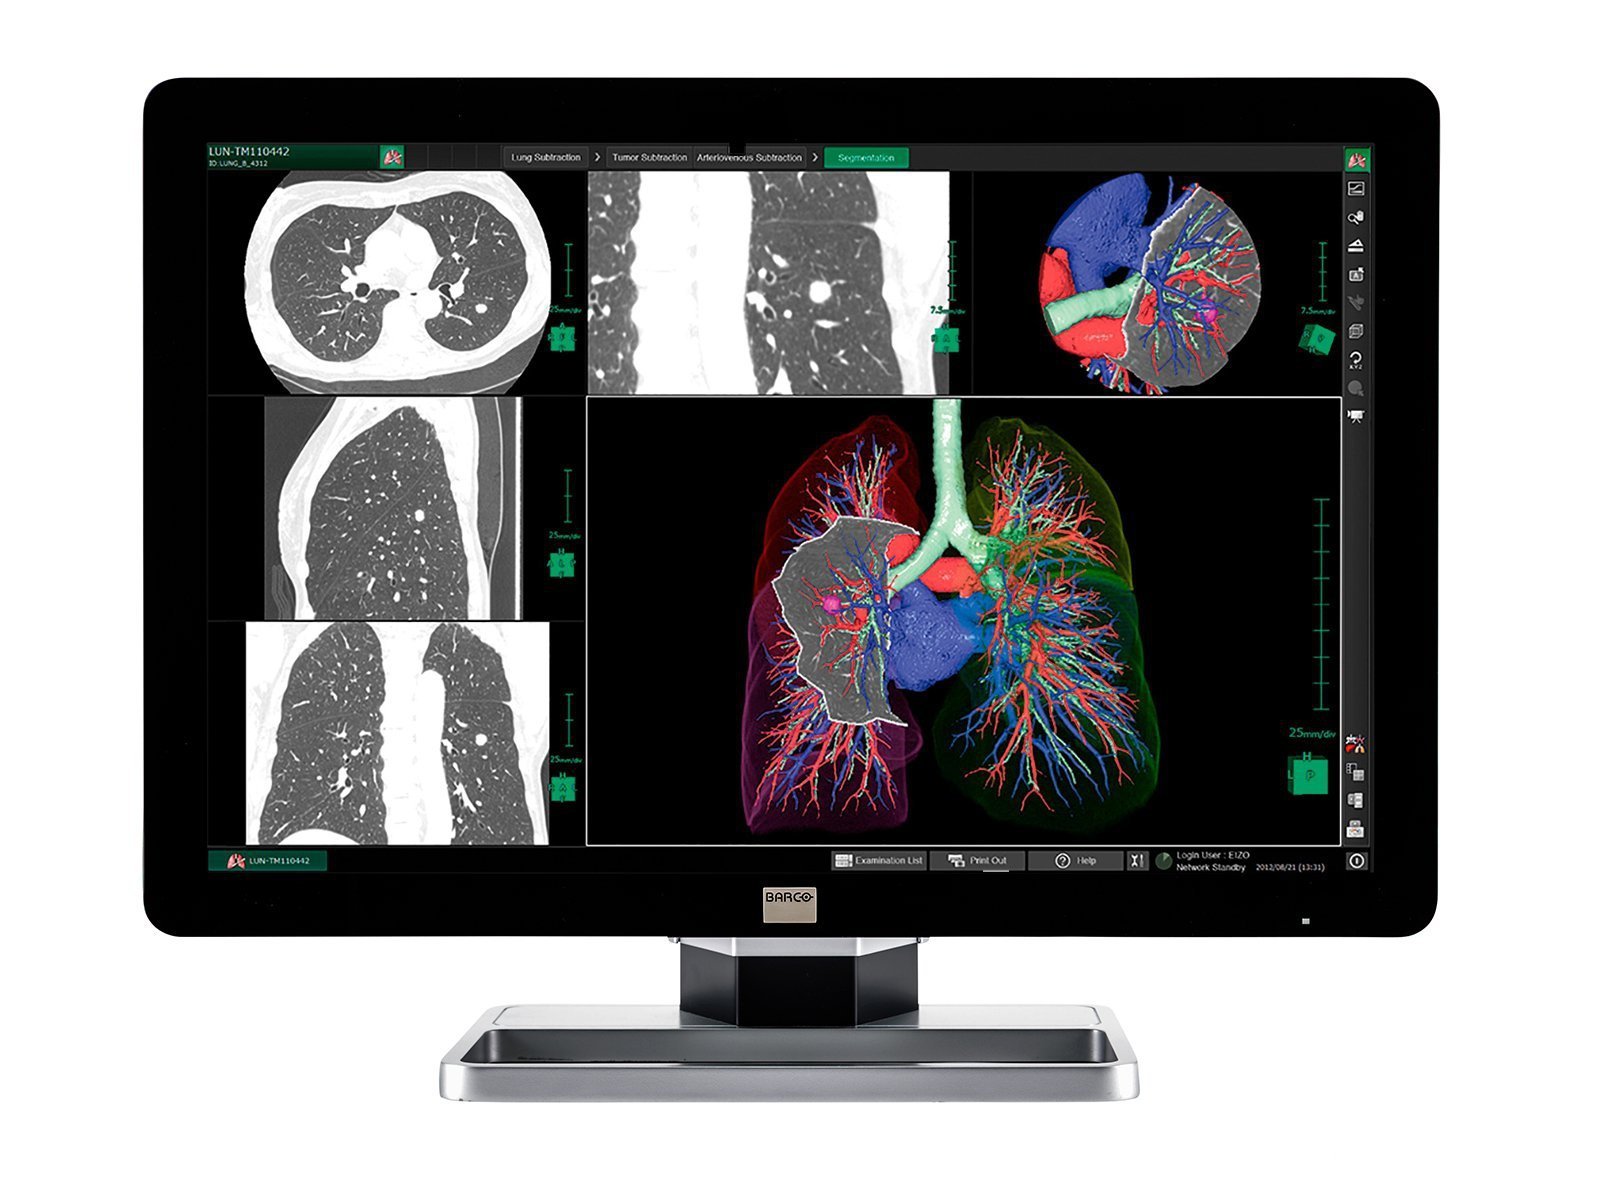 Complete PACS General Radiology Station | Barco 6MP Color LED Display | Dell Workstation | Dictation Mic | Worklist Monitor (63307920)